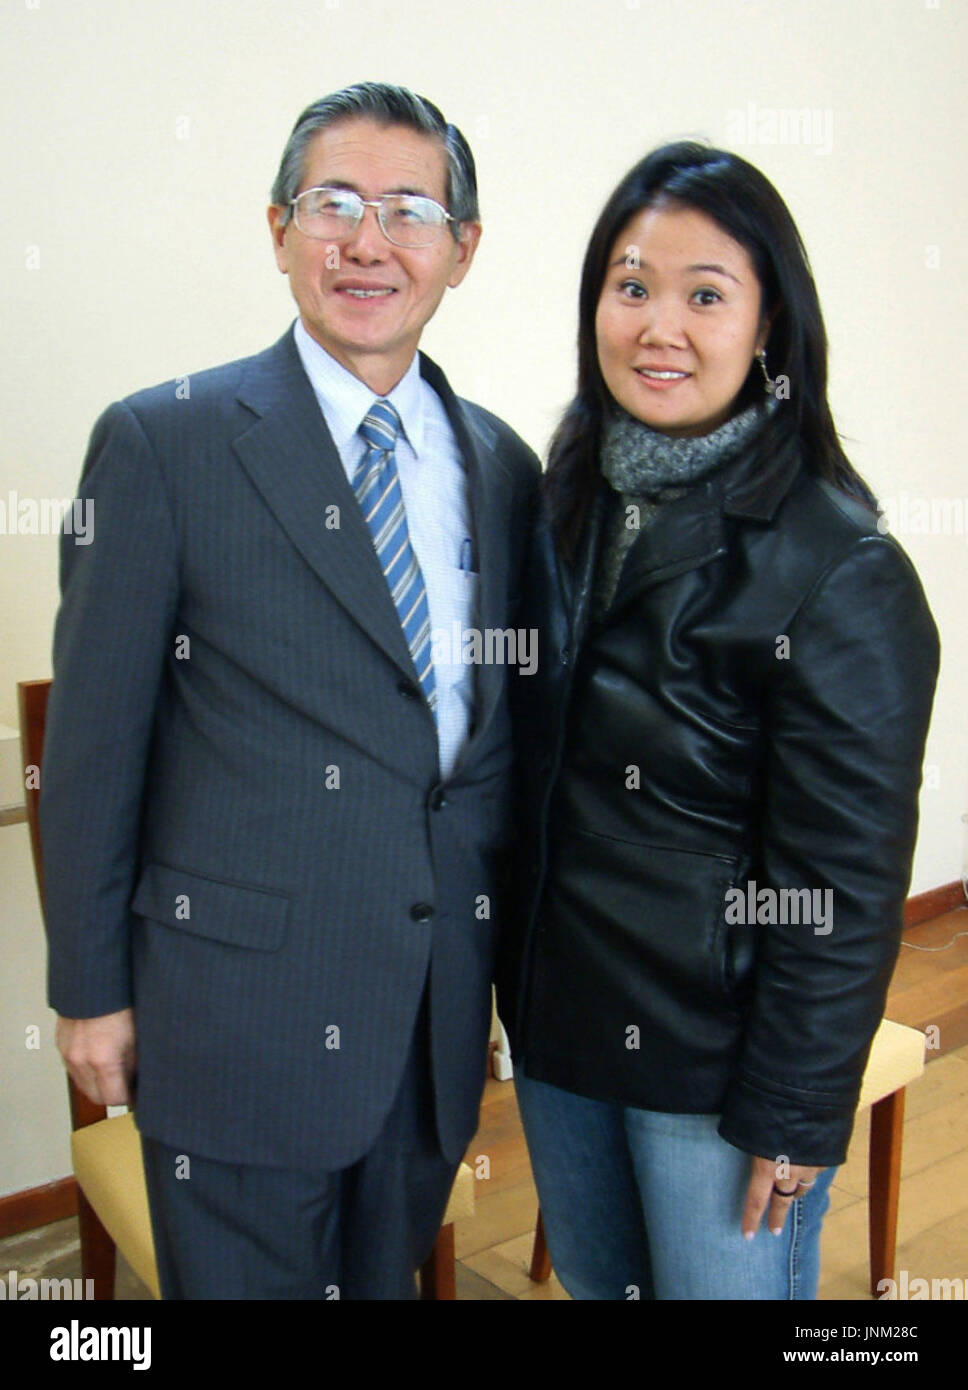 SANTIAGO, Chile - Former Peruvian President Alberto Fujimori (L) poses with his daughter Keiko in Santiago on May 20. Fujimori was released on bail May 18 as court hearings continue in Santiago over Peru's request for his extradition. (Kyodo) Stock Photo